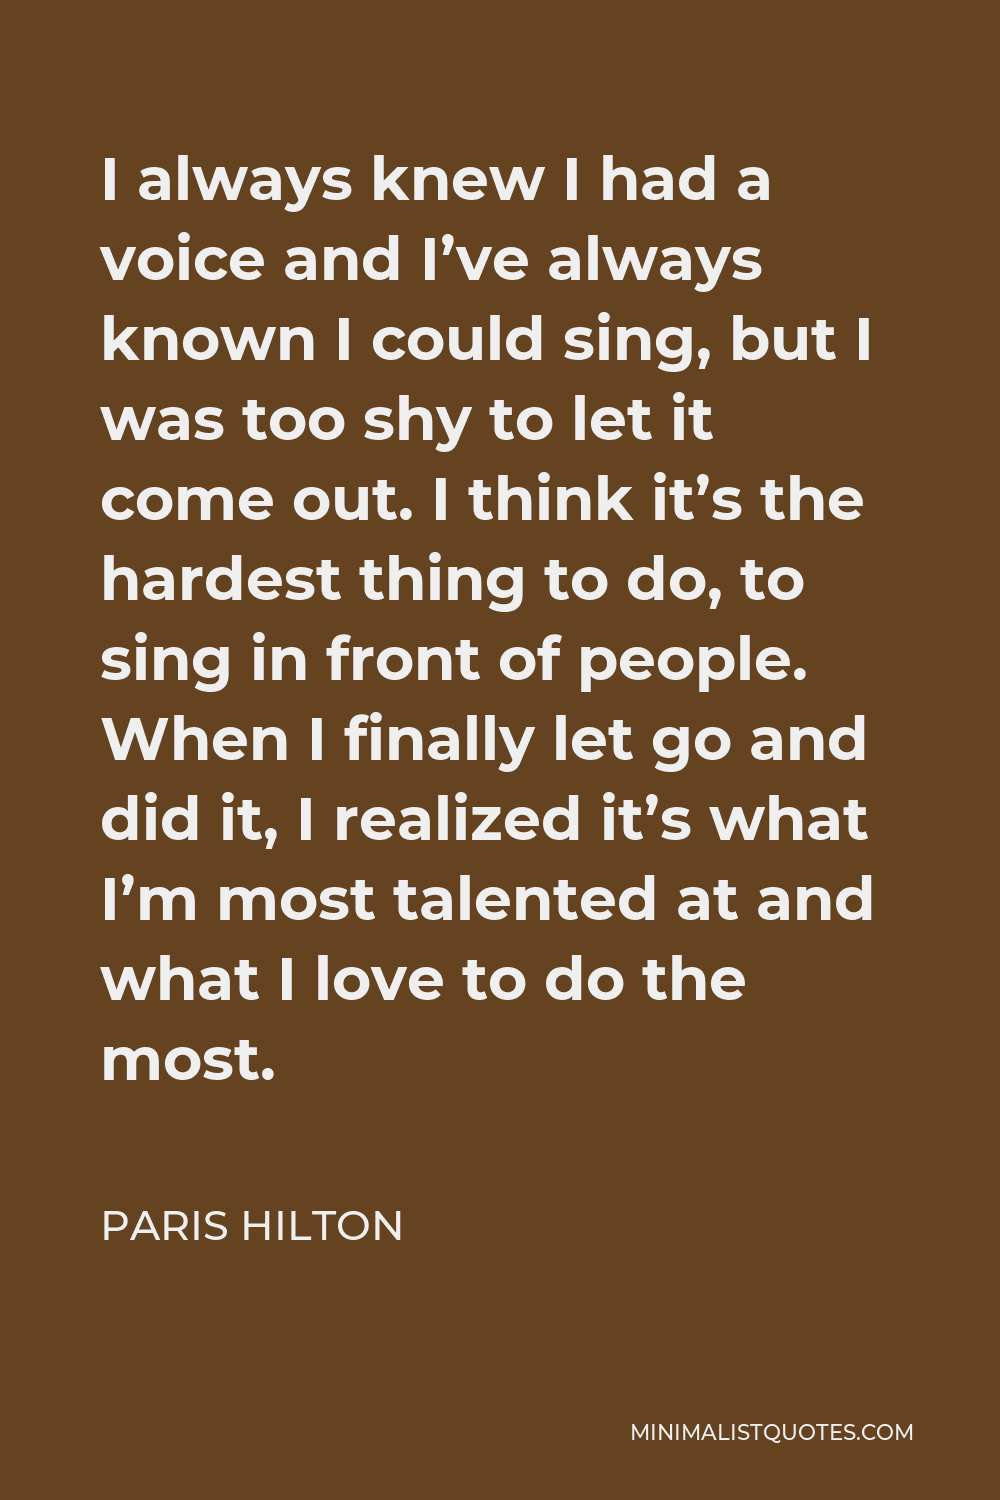 Paris Hilton Quote - I always knew I had a voice and I’ve always known I could sing, but I was too shy to let it come out. I think it’s the hardest thing to do, to sing in front of people. When I finally let go and did it, I realized it’s what I’m most talented at and what I love to do the most.